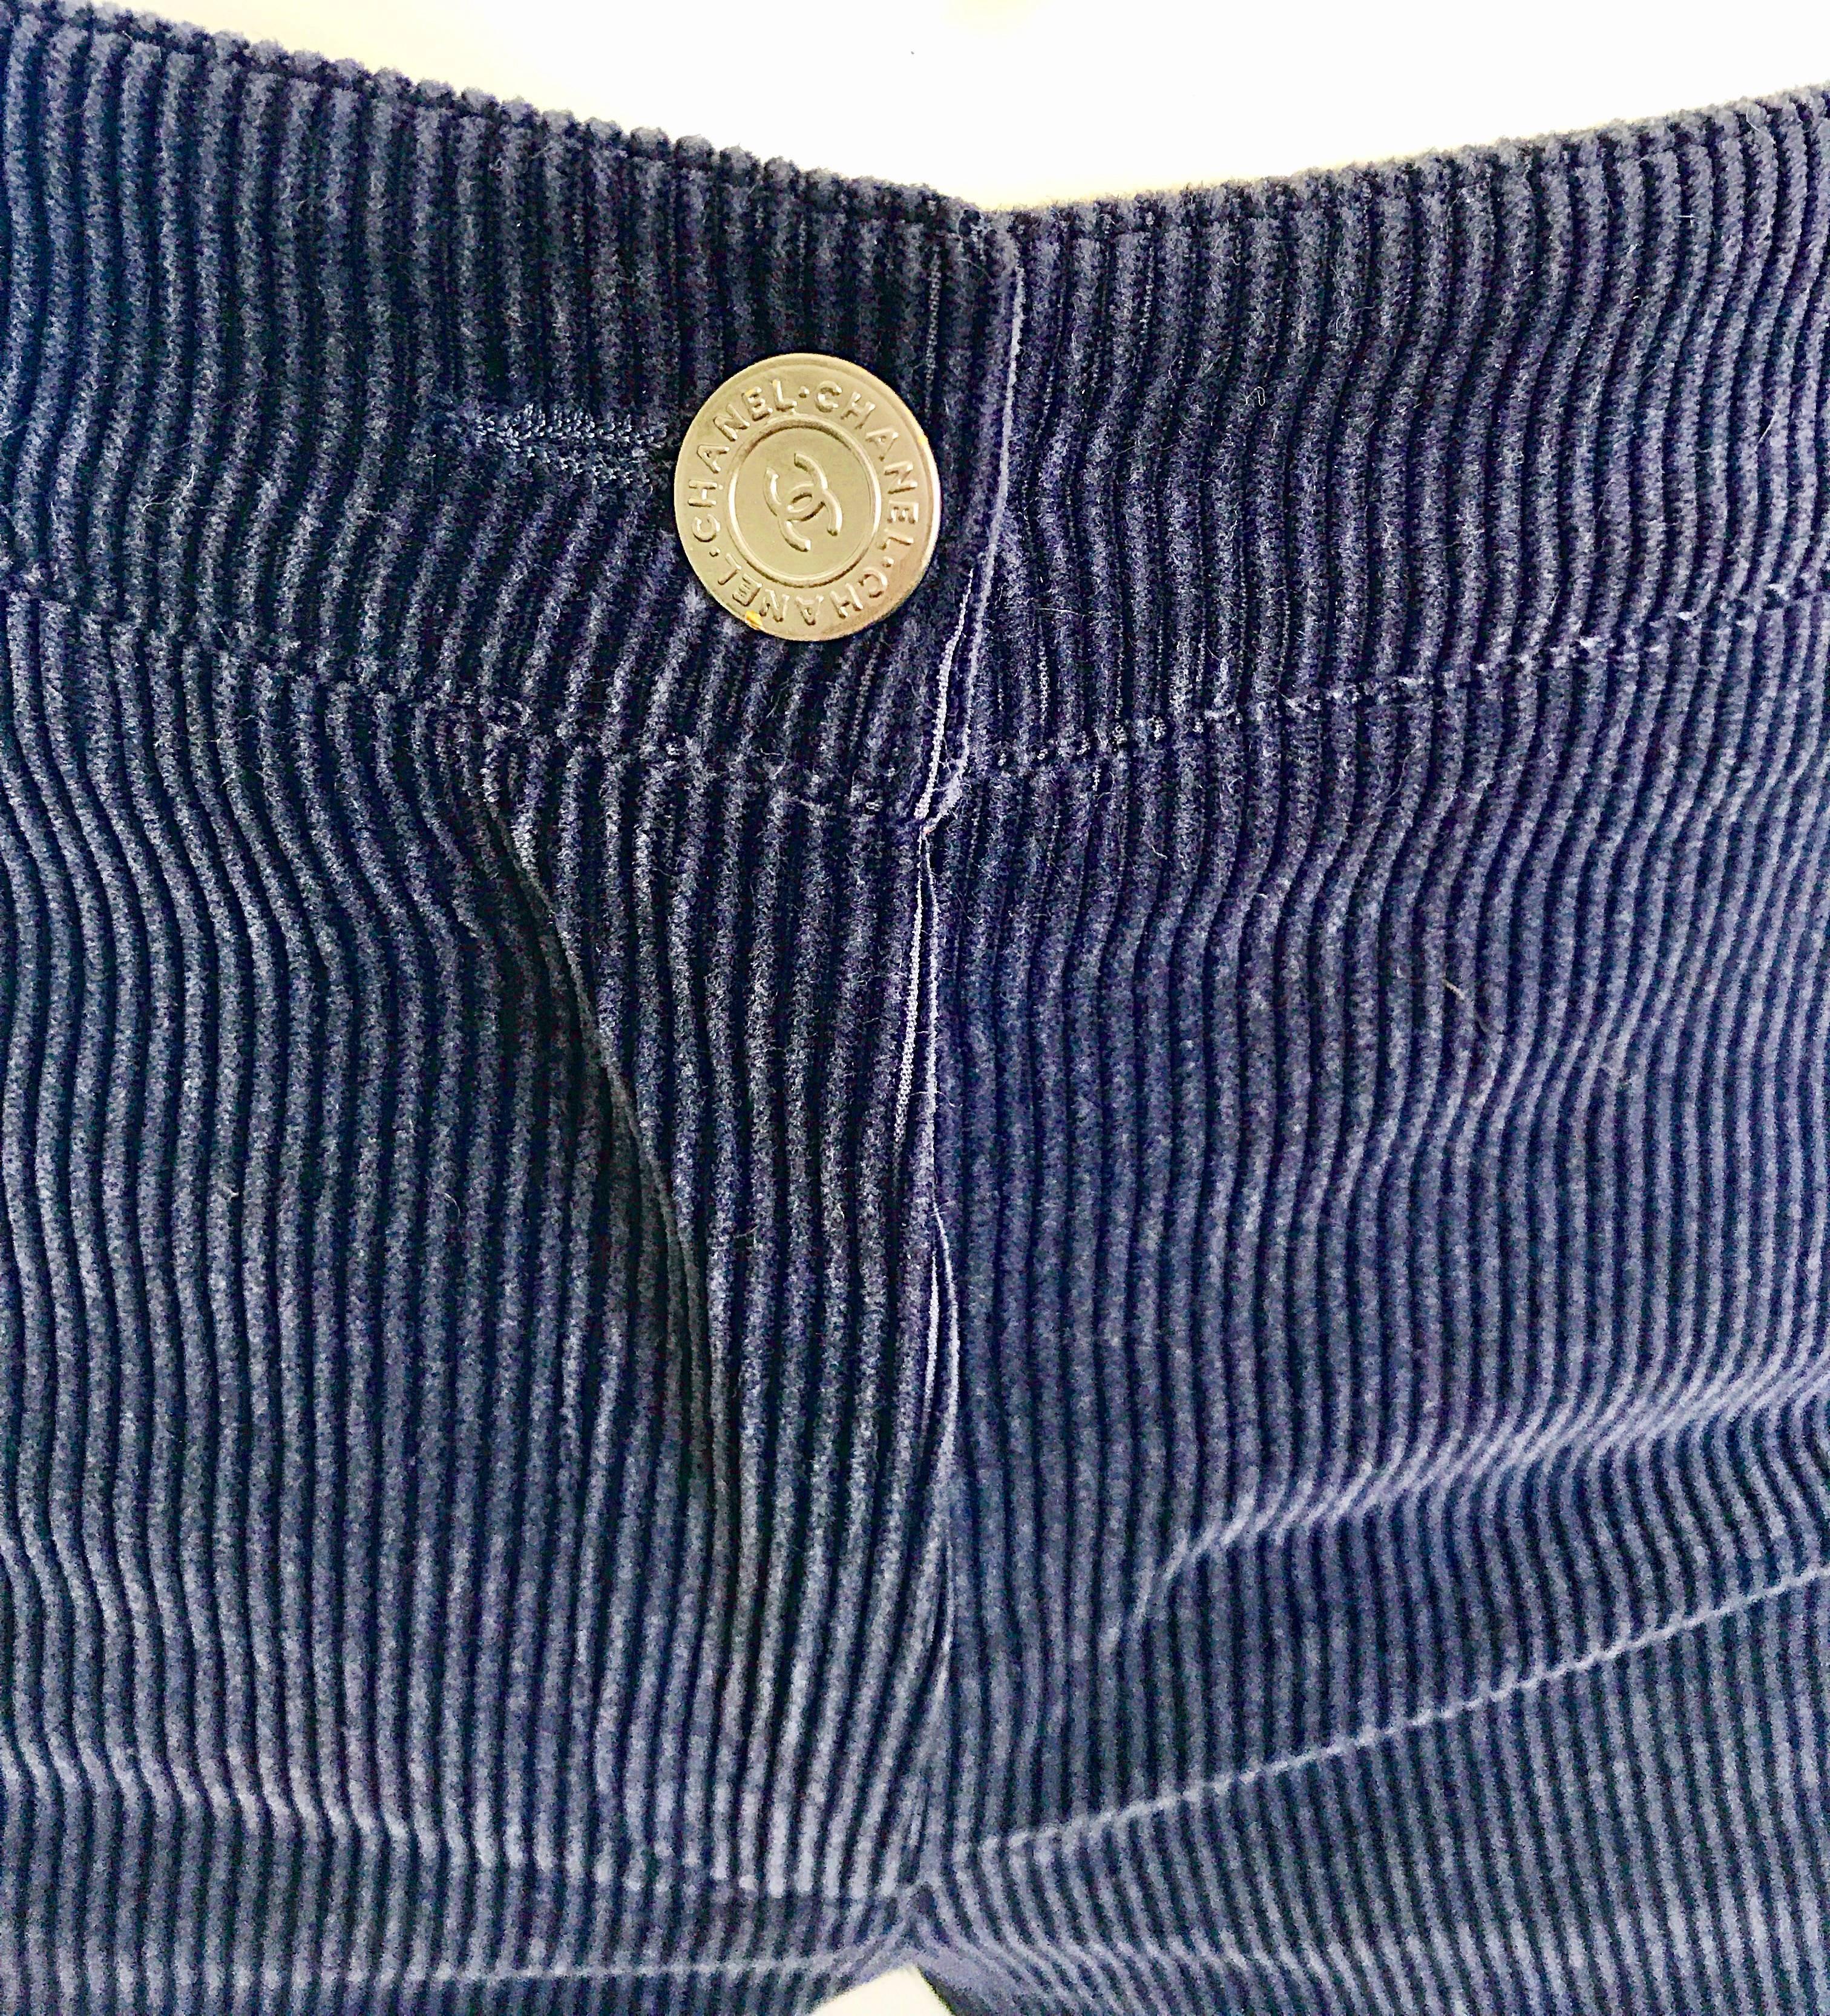 Chanel 2003 Sz 40 Navy Blue Corduroy Mid Rise Slim Fit Capri Pants Pedal Pushers In Excellent Condition For Sale In San Diego, CA